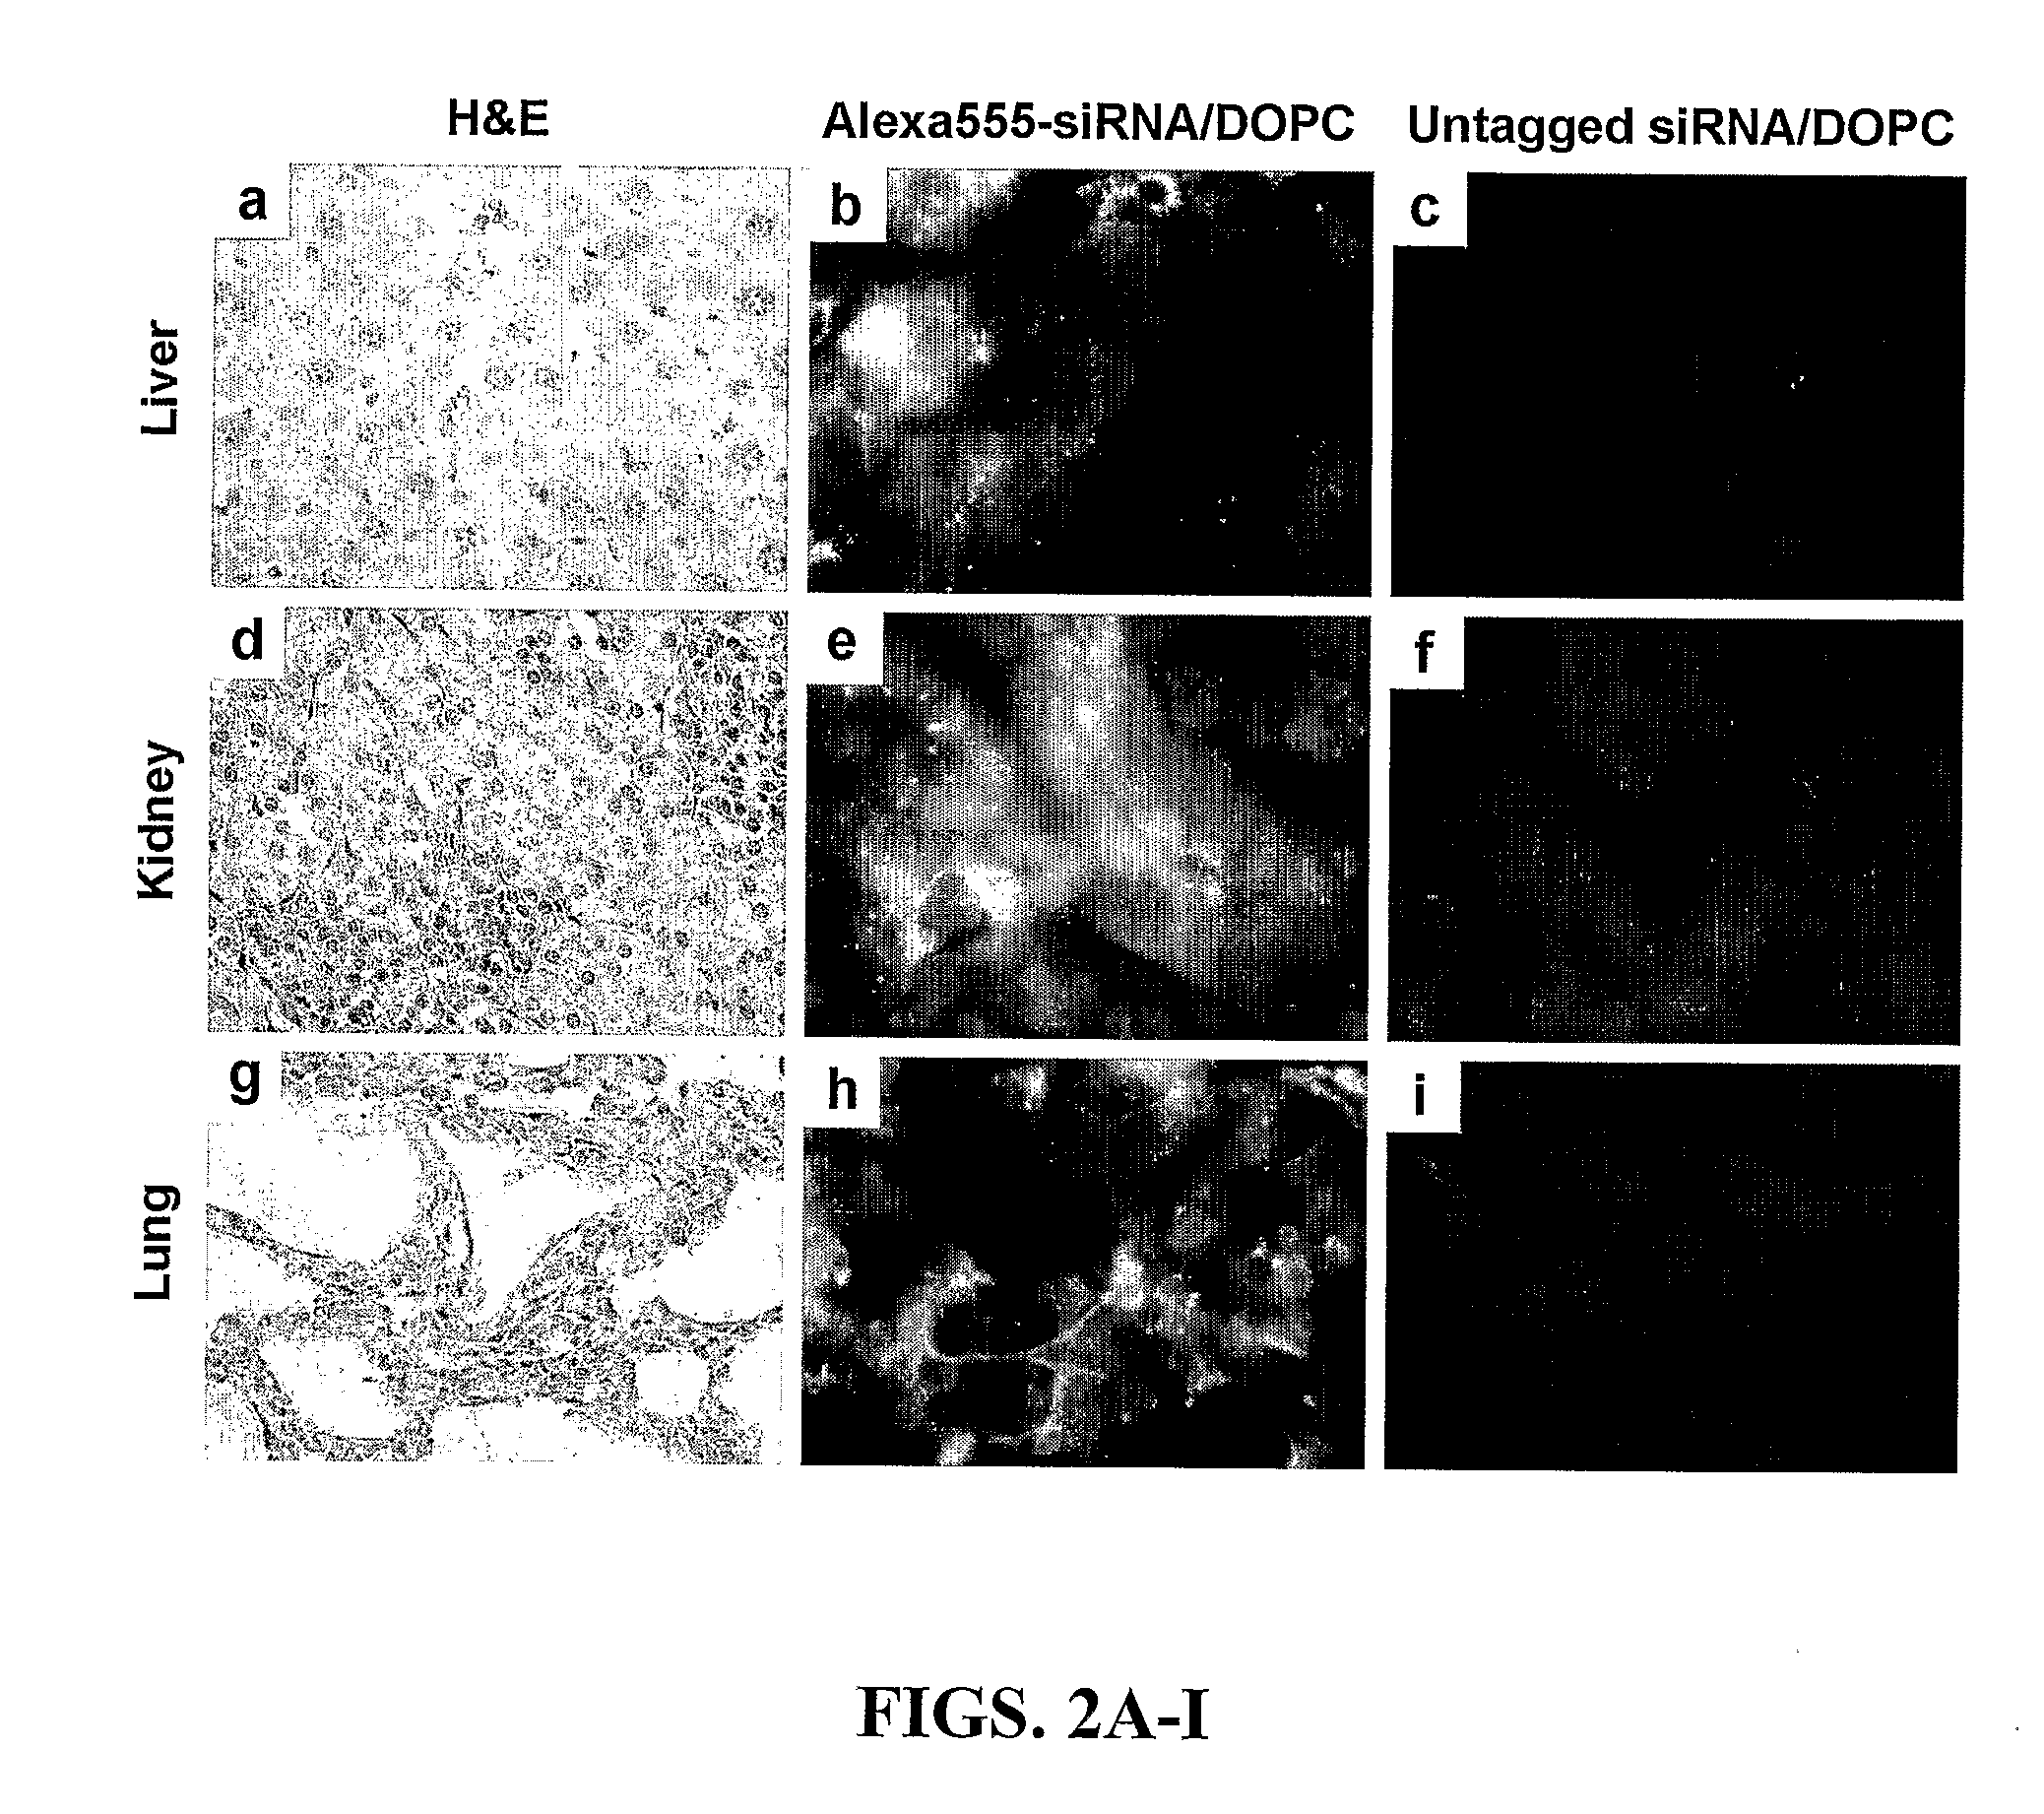 Delivery of Sirna by Neutral Lipid Compositions